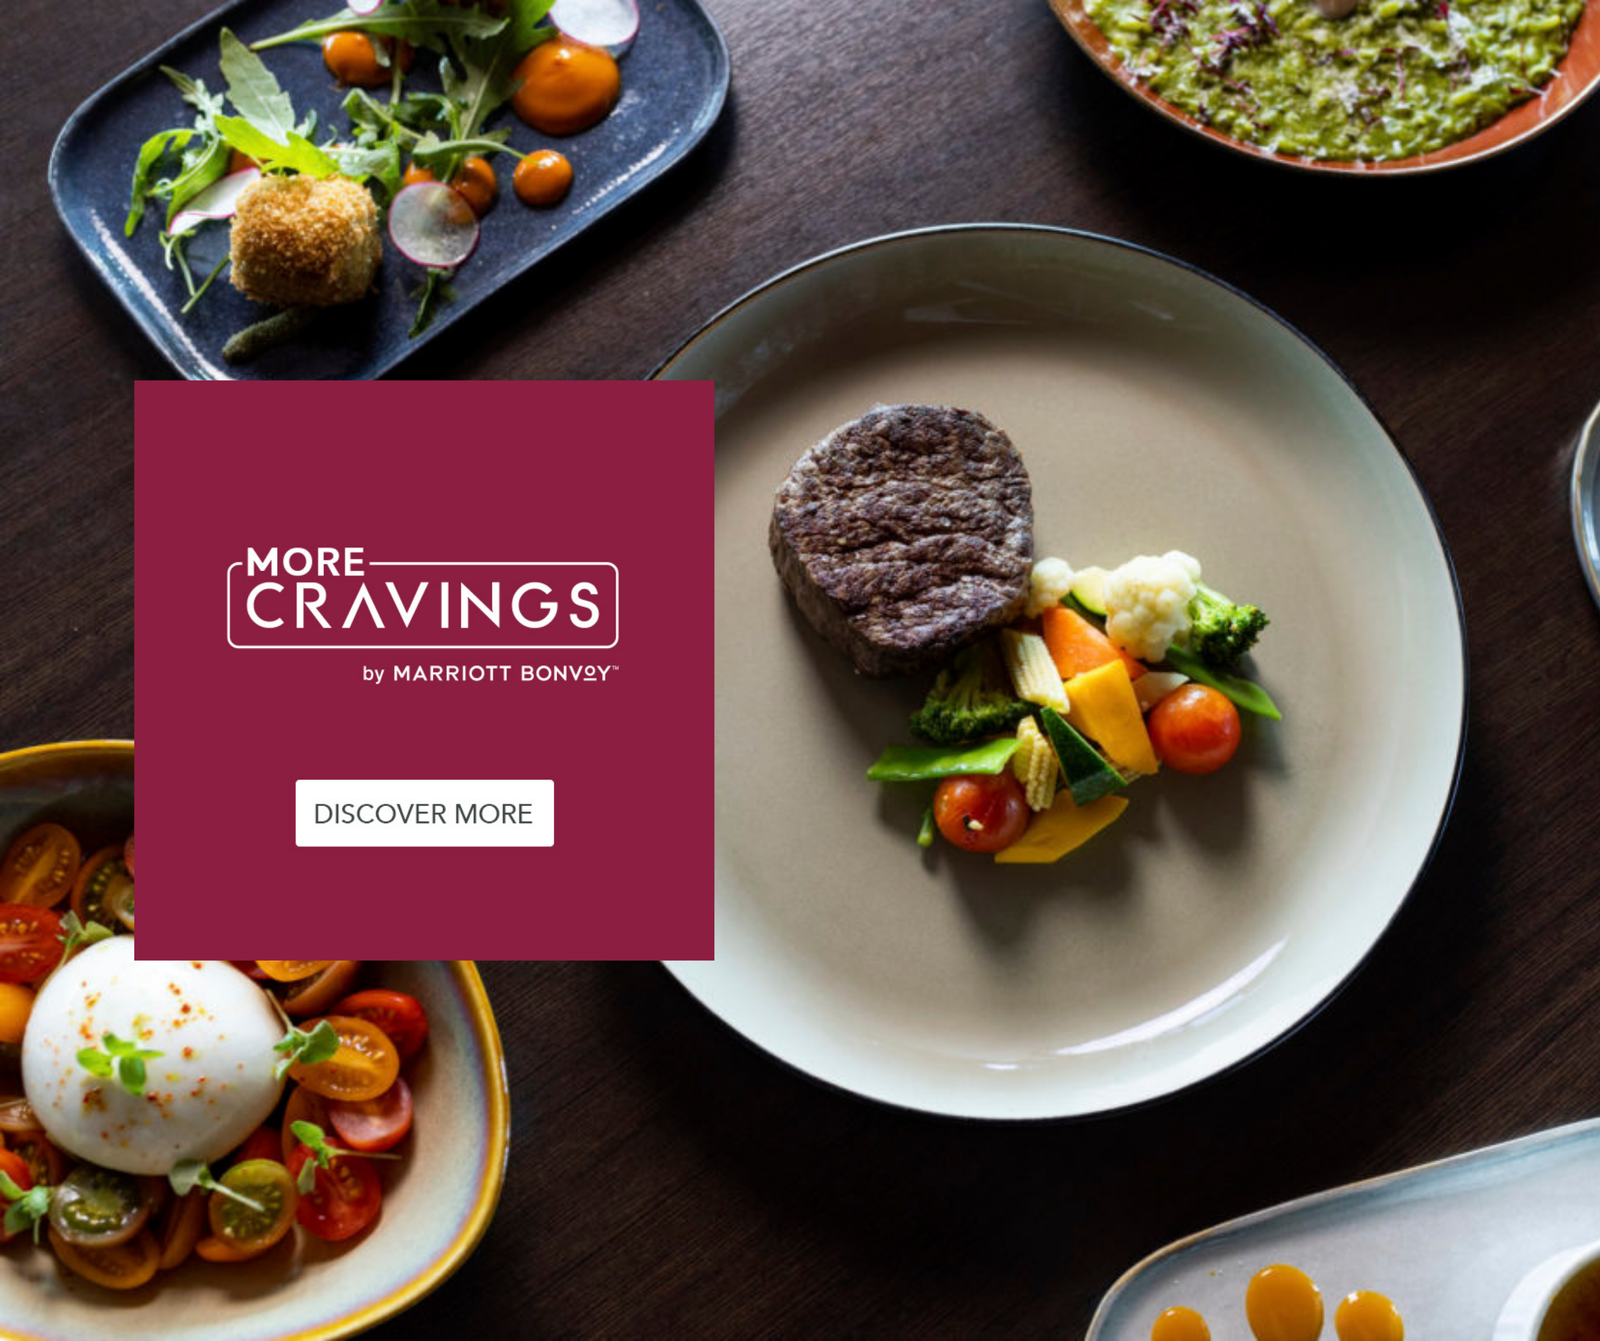 More Cravings by Marriott BonvoyTM  launches its app in the UAE